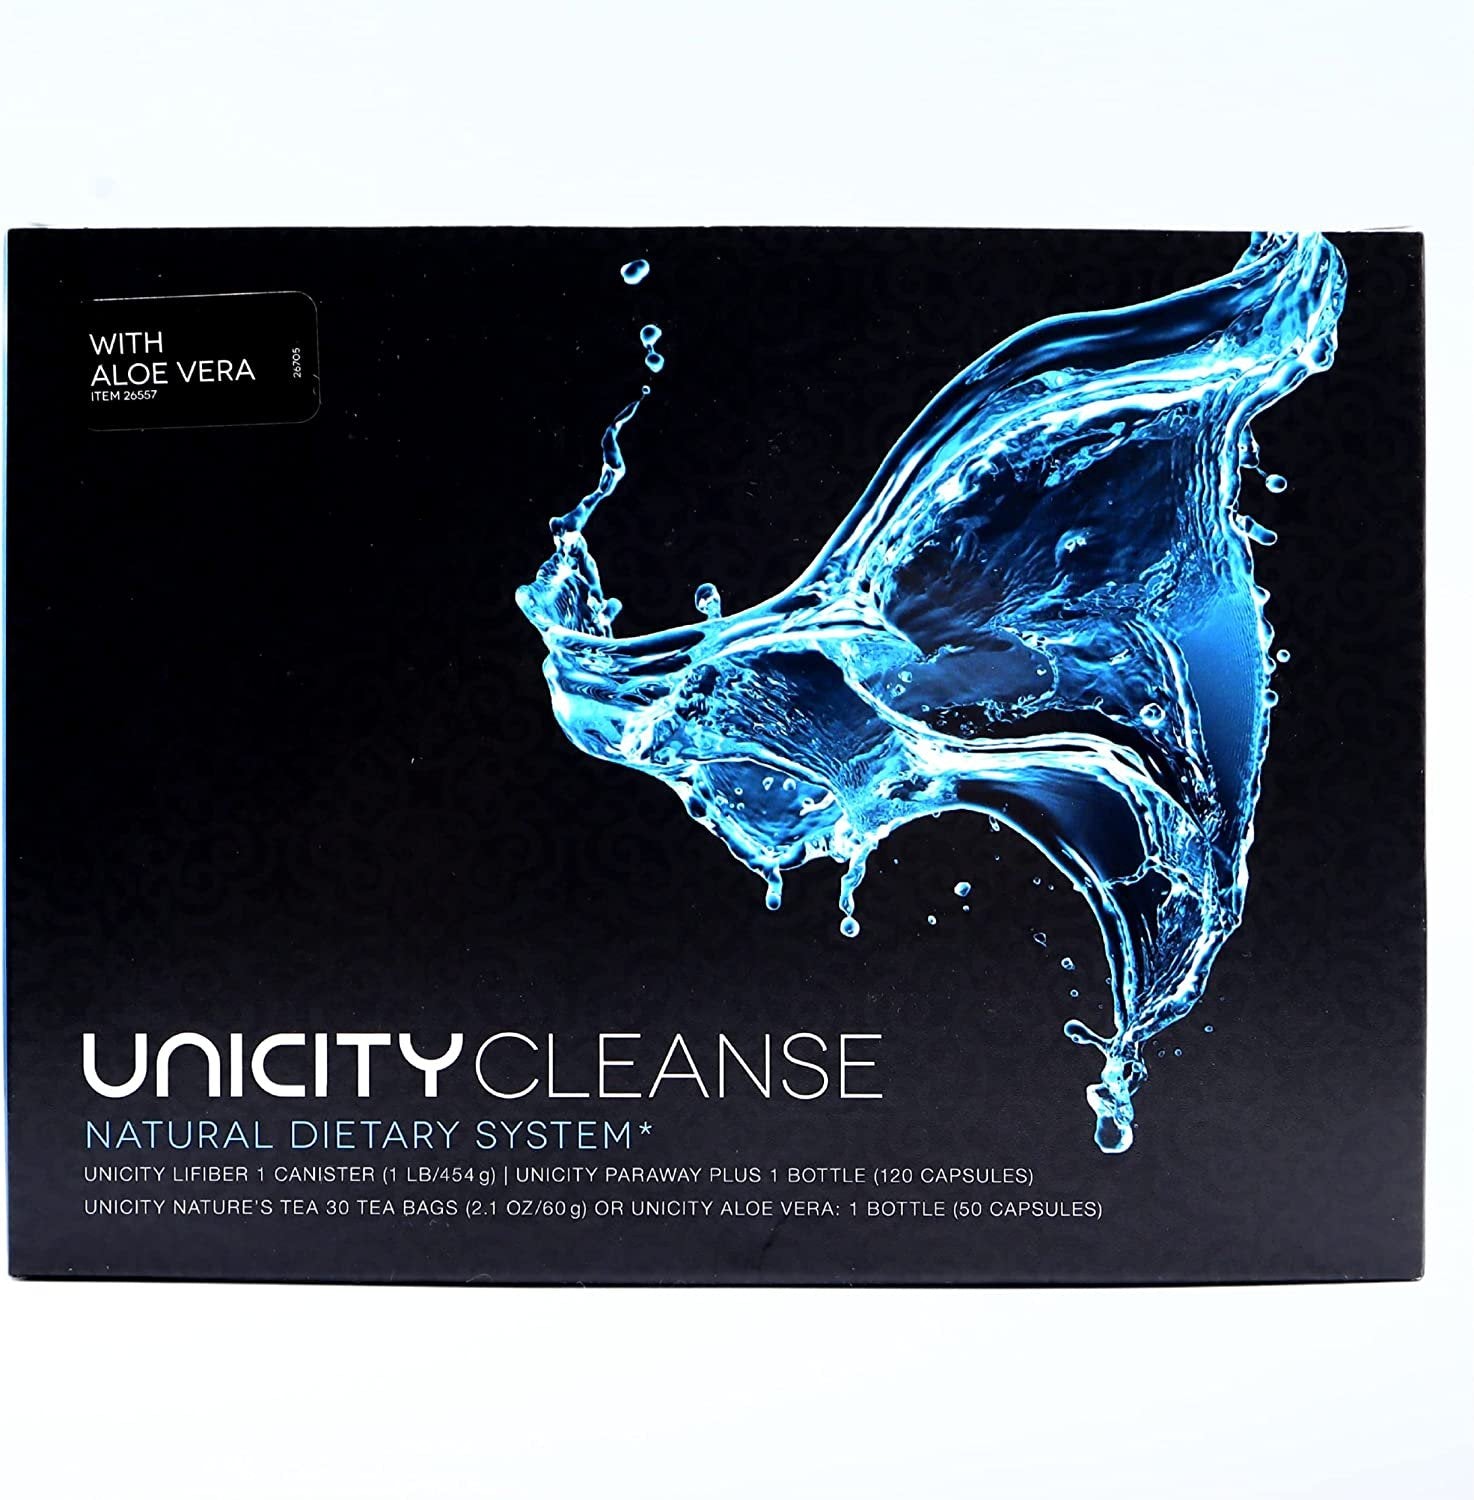 Unicity Cleanse with Aloe Vera Natural Dietary System - Healthy Detox Cleanse Kit of Unicity LiFiber Intestinal Cleanse, Paraway Plus Body Cleanse, and Aloe Vera Gastrointestinal Support